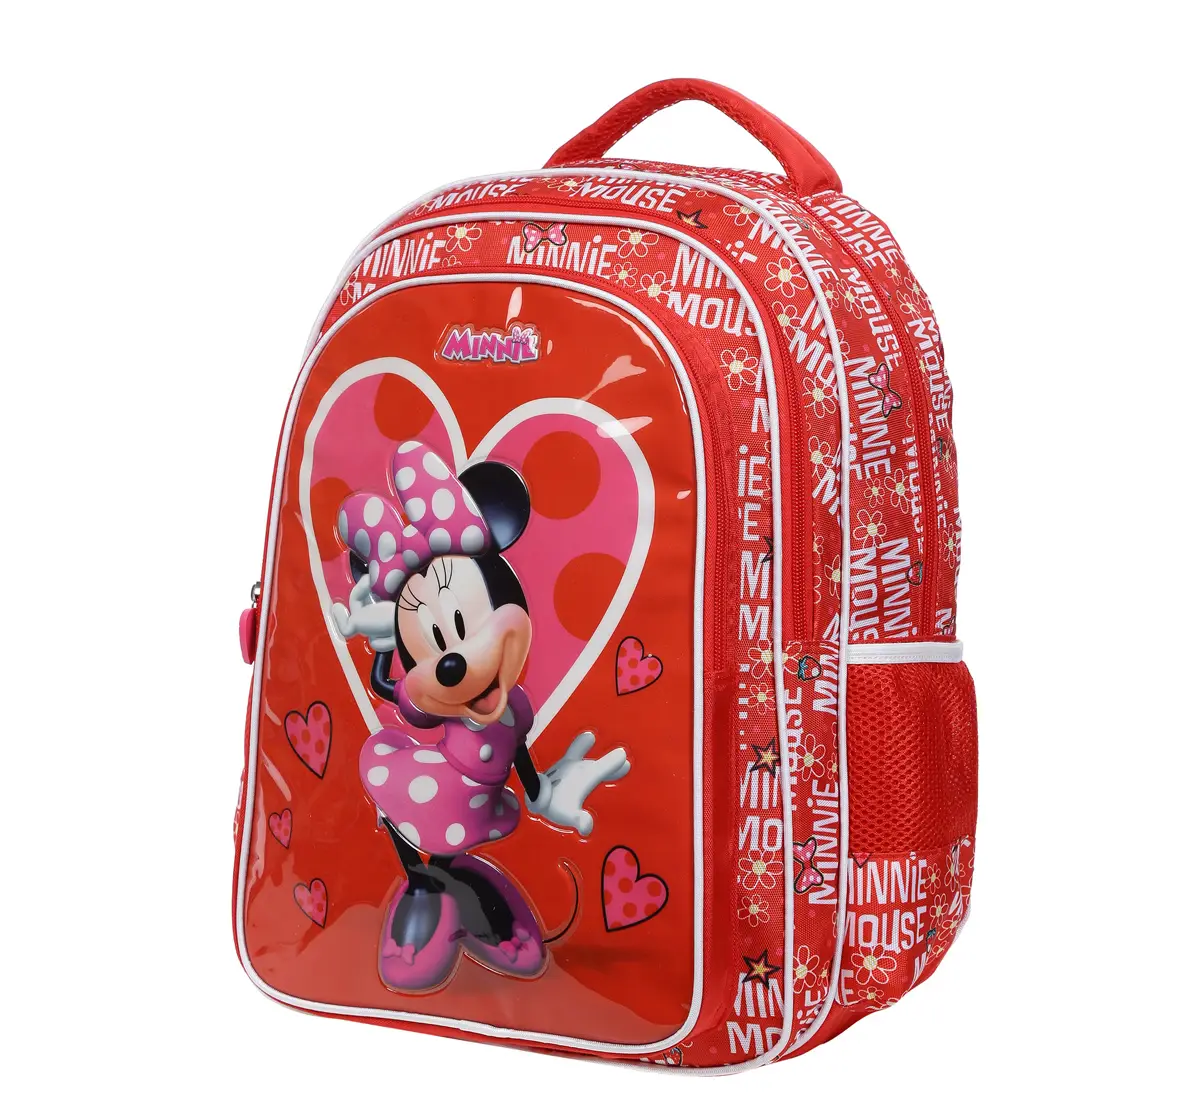 Simba Minnie Heart 18 Backpack Multicolor 3Y+